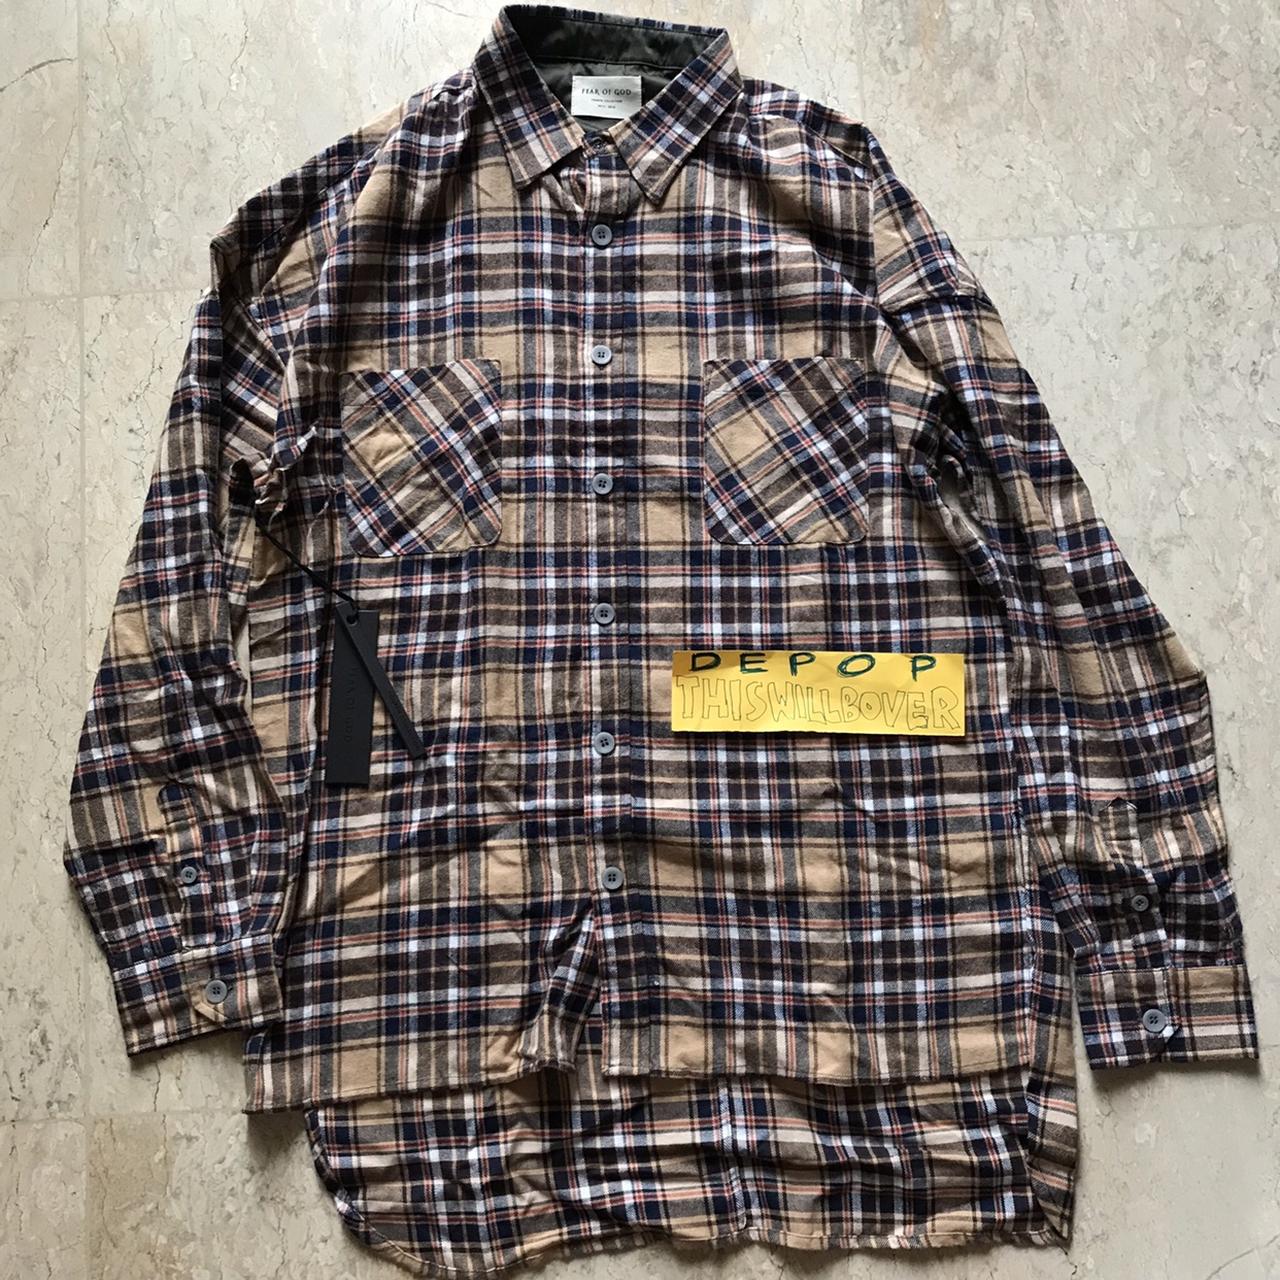 Fear of god fourth collection khaki color flannel,...